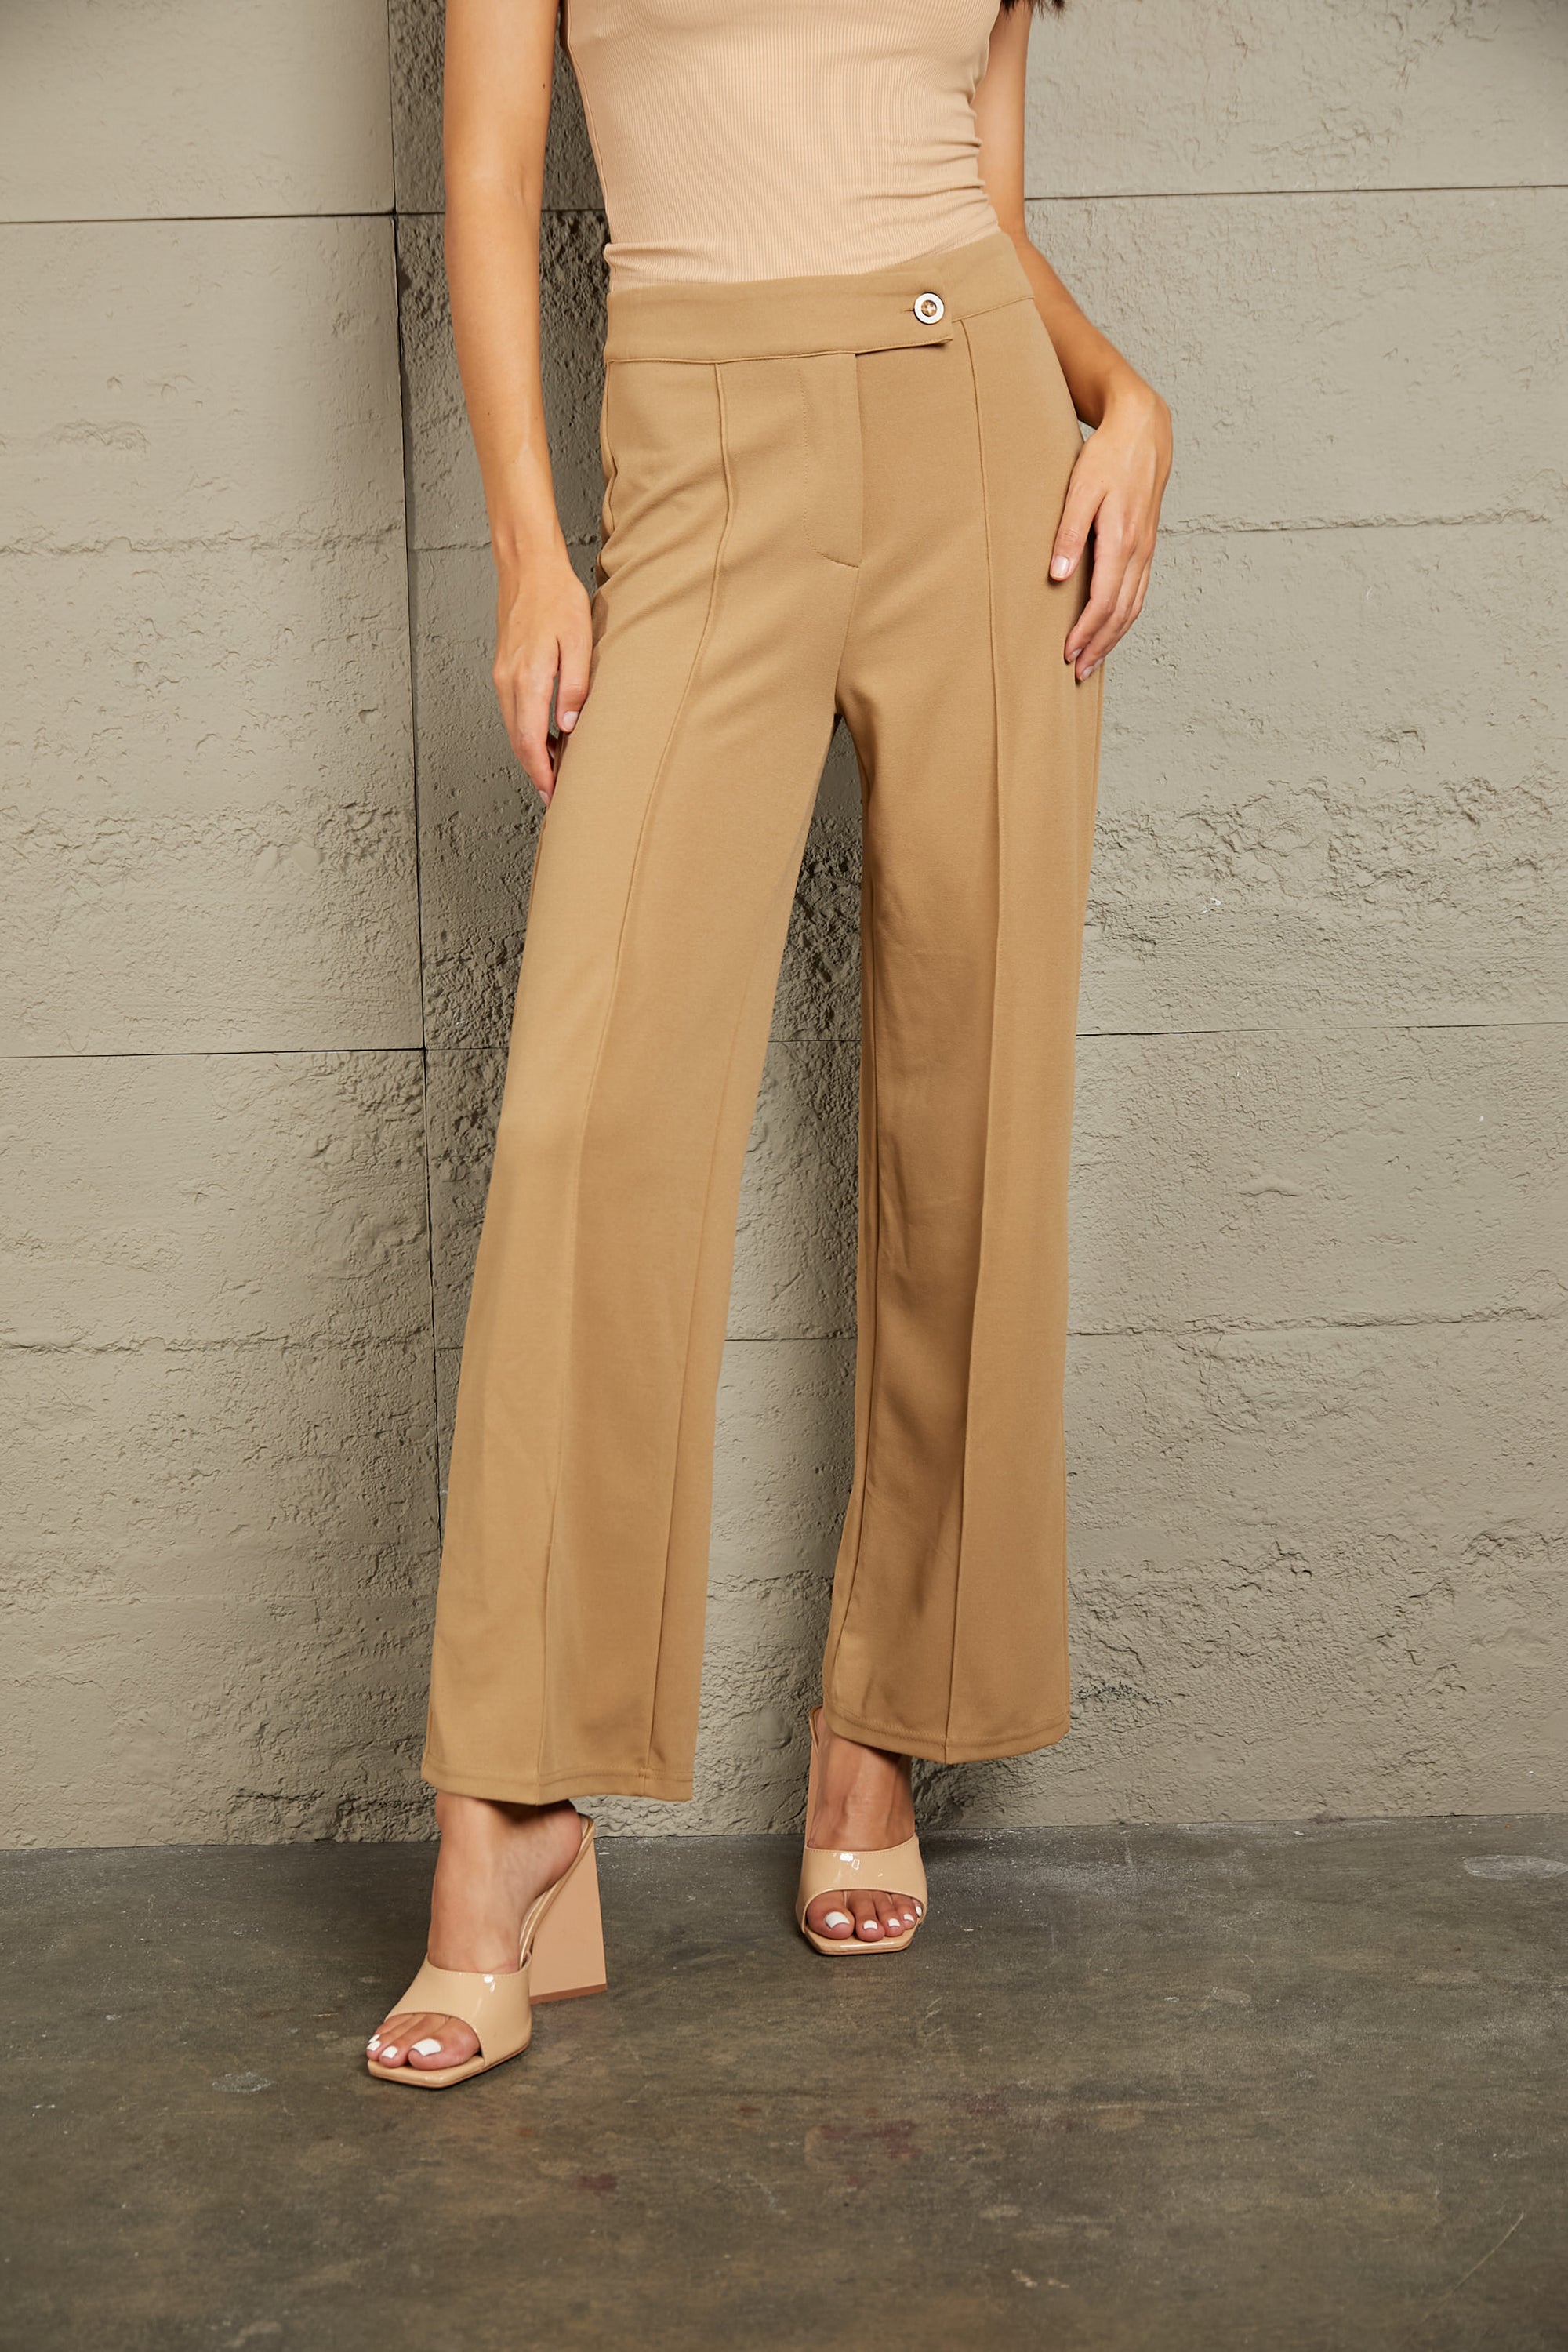 Rosy Brown Double Take Center Seam Straight Leg Pants Sentient Beauty Fashions Apparel & Accessories